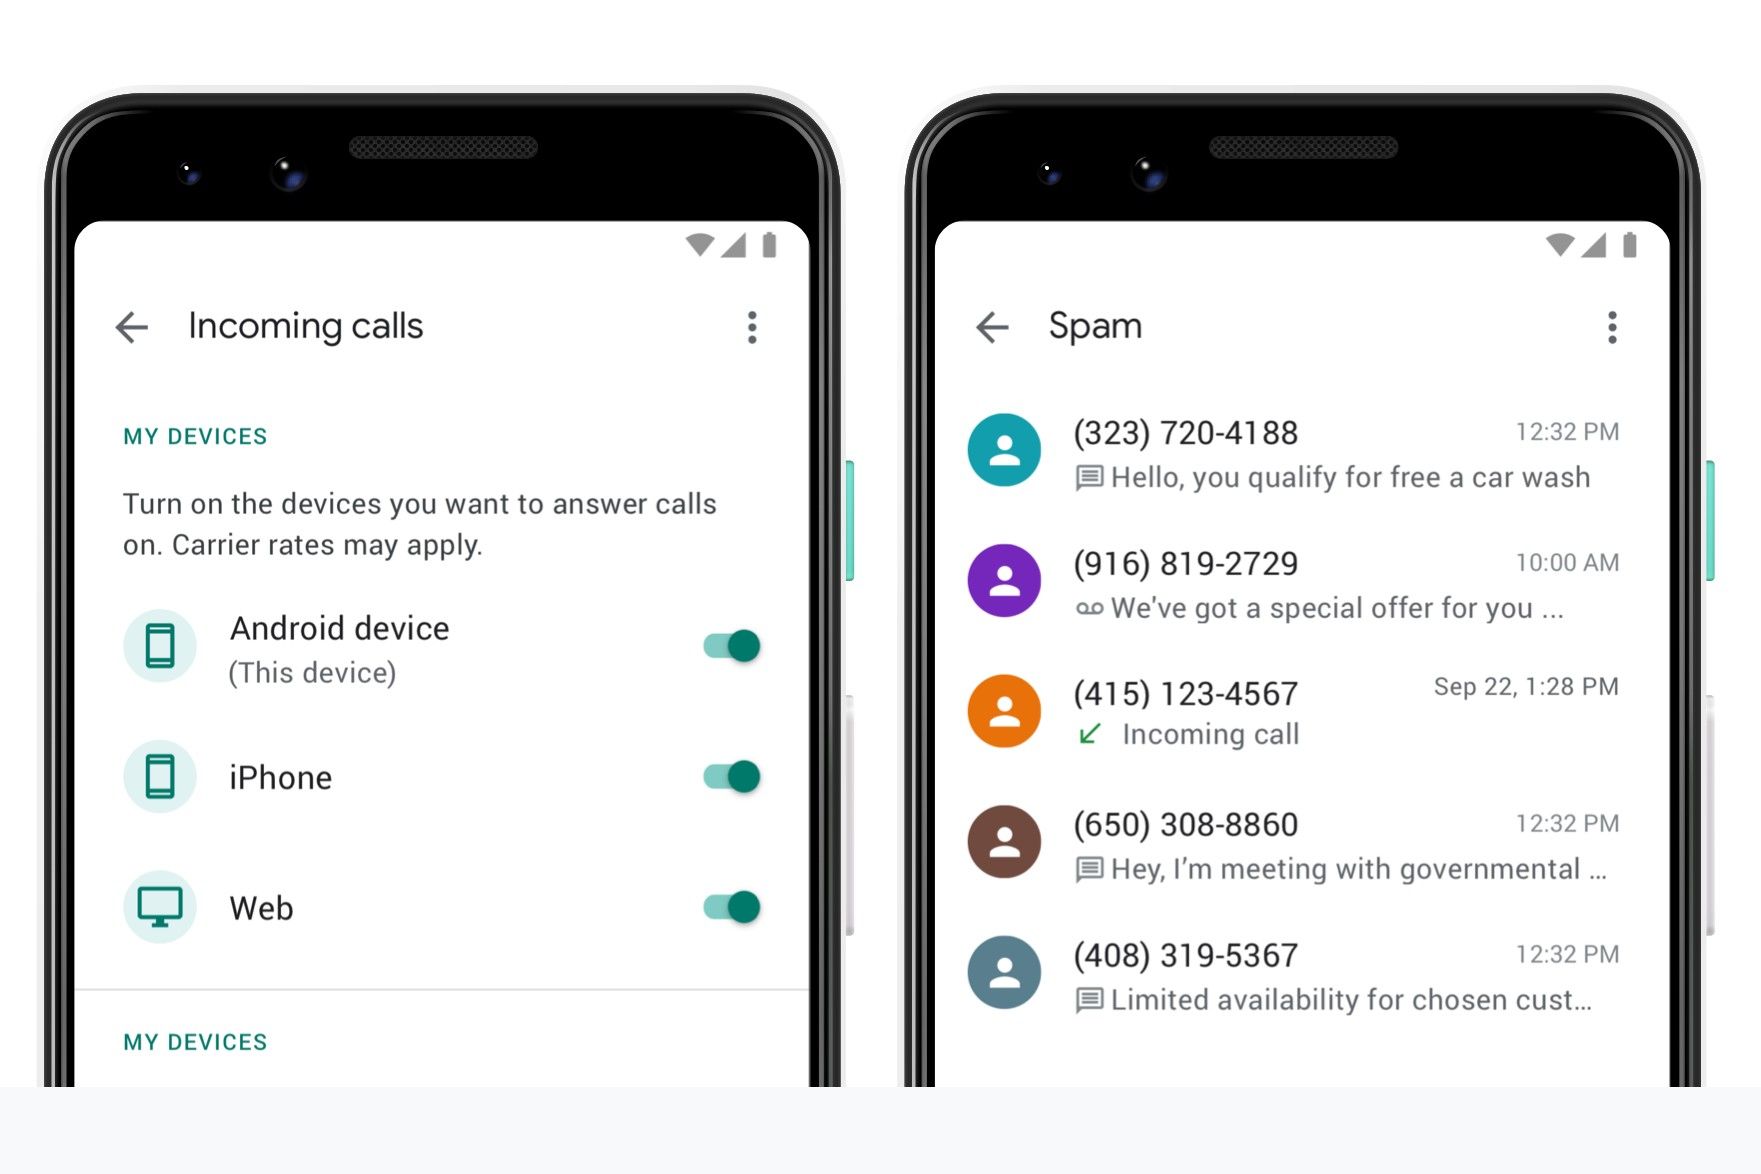 Google Voice screens for routing calls and blocking spam.